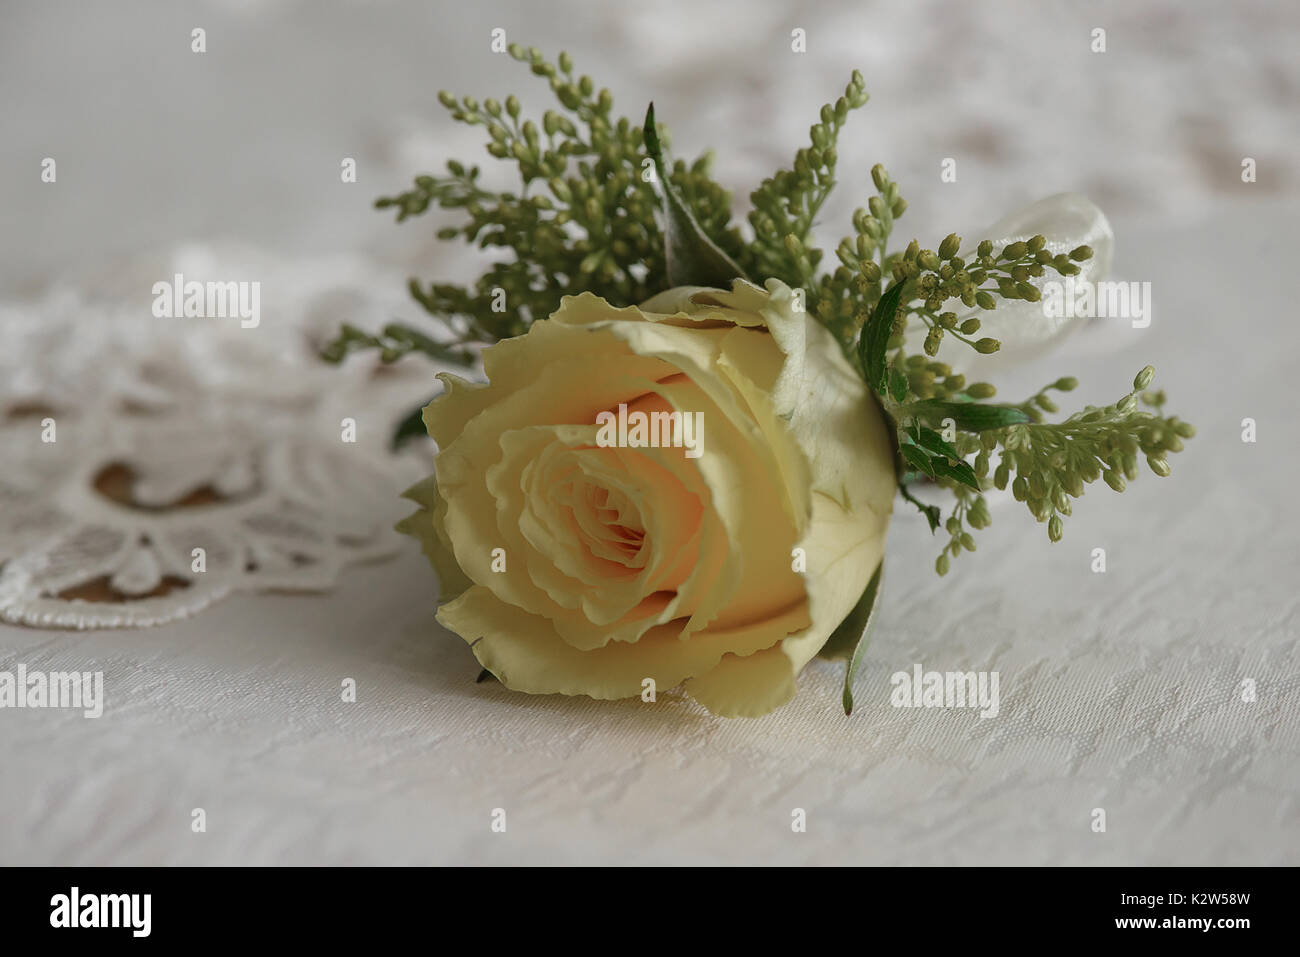 Wedding accessories: fresh yellow rose small bouquet for buttonhole used for groom and wedding guests positioned on a white cloth, in natural light Stock Photo